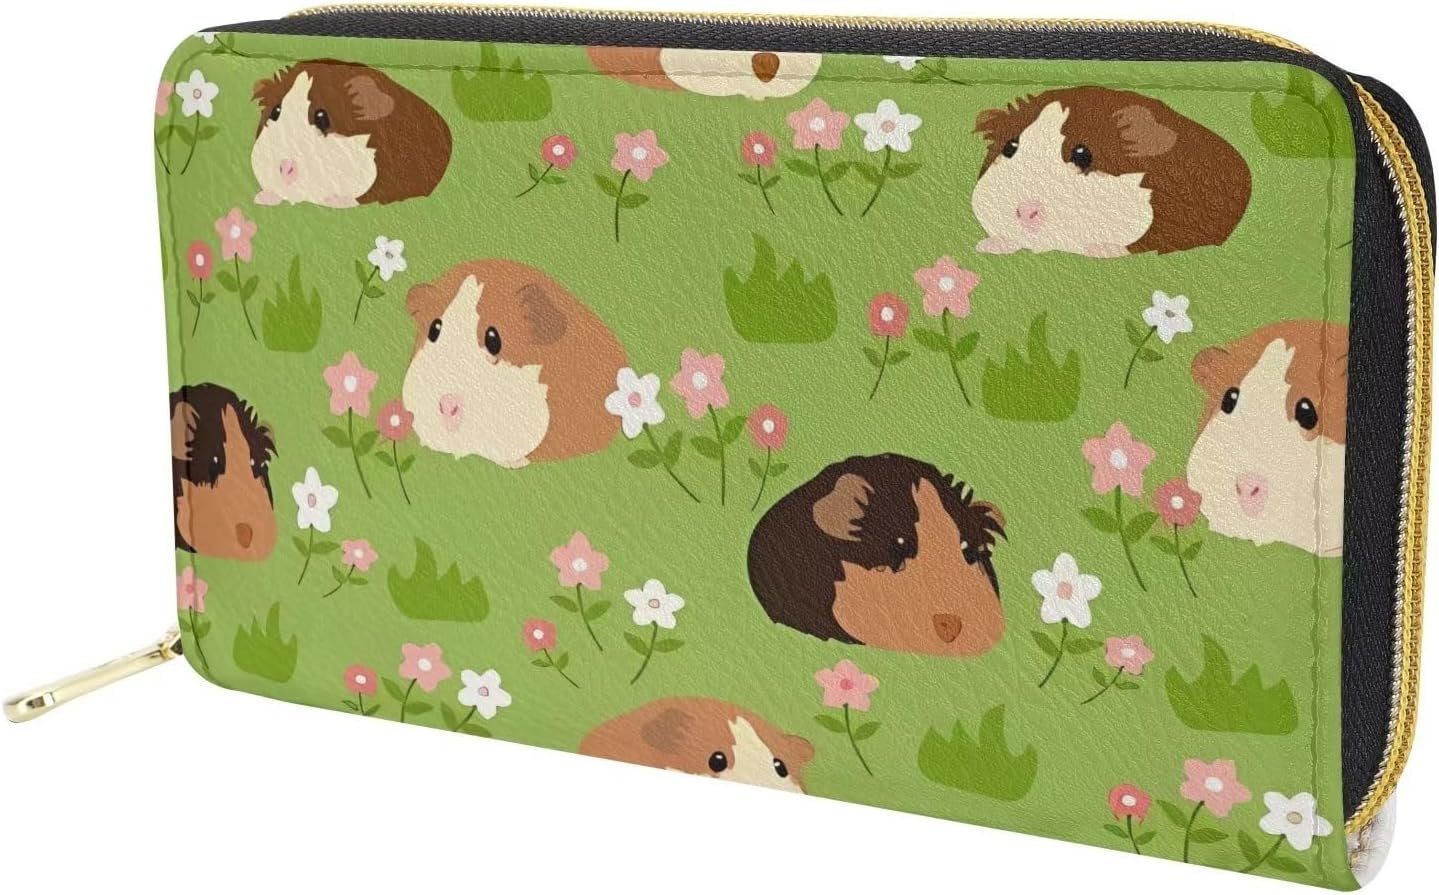 Chickens and Floral Print Wallet Review